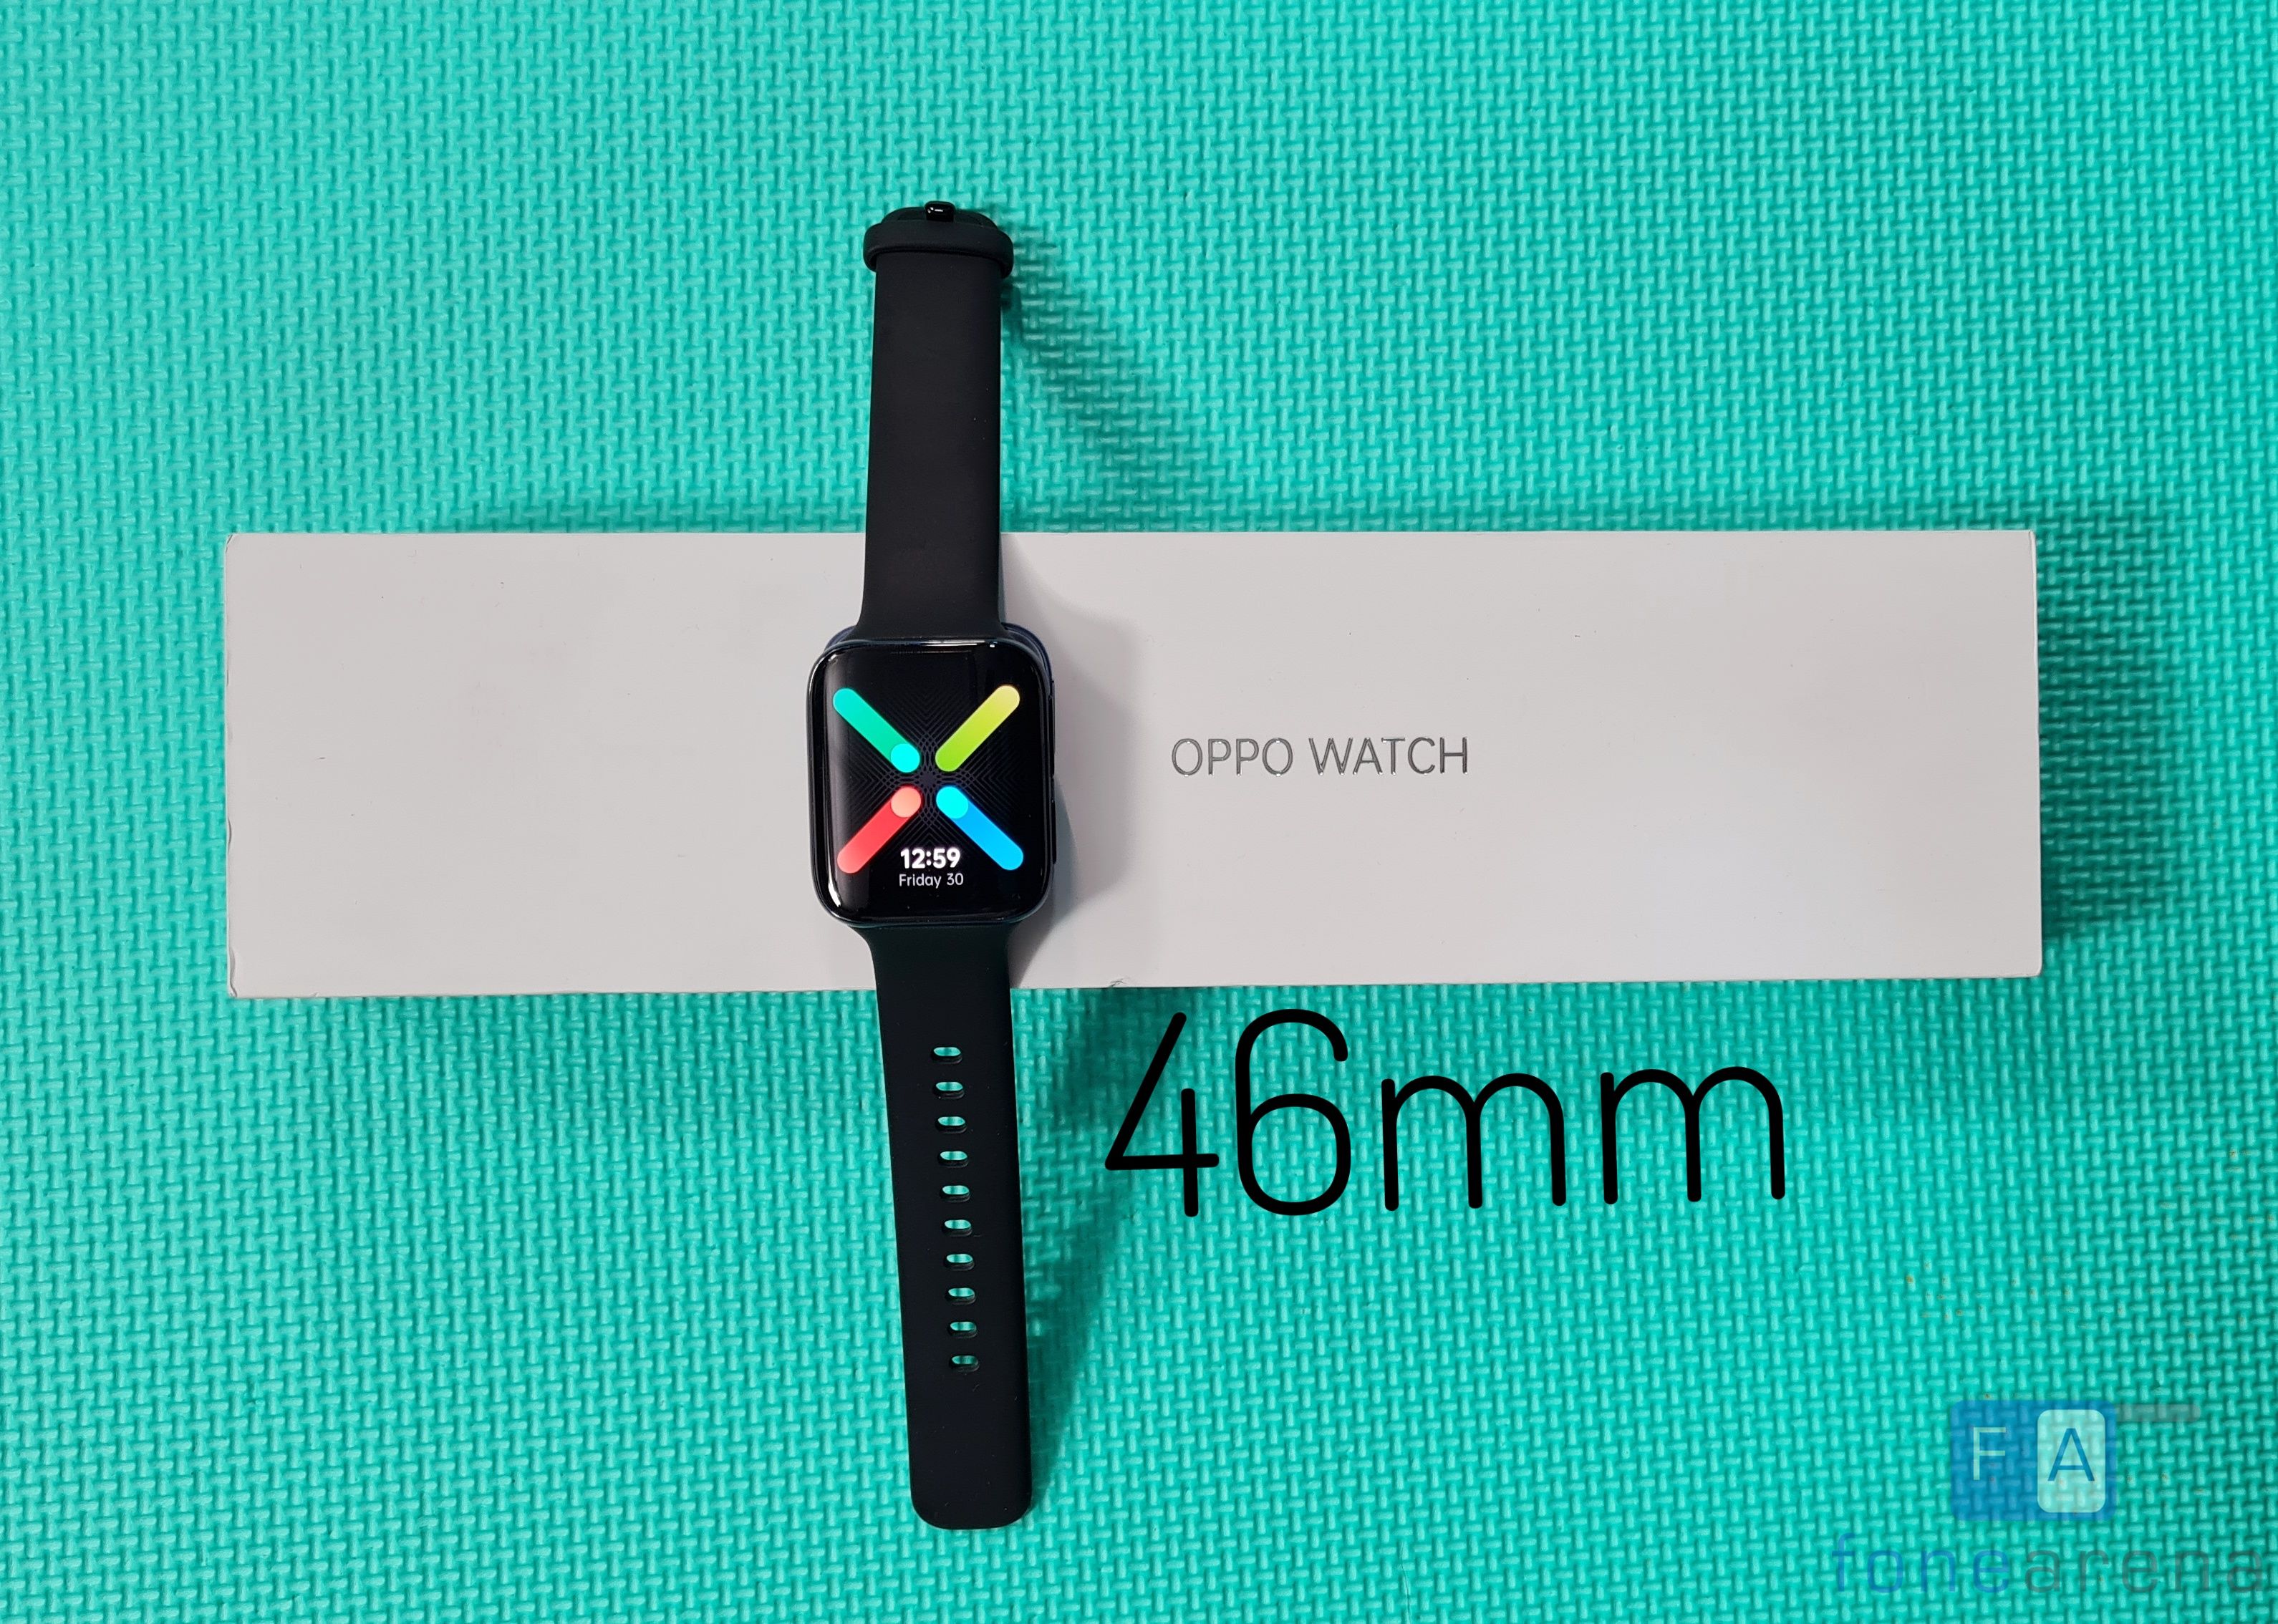 OPPO Watch Review: Impressive debut that's worth recommending!